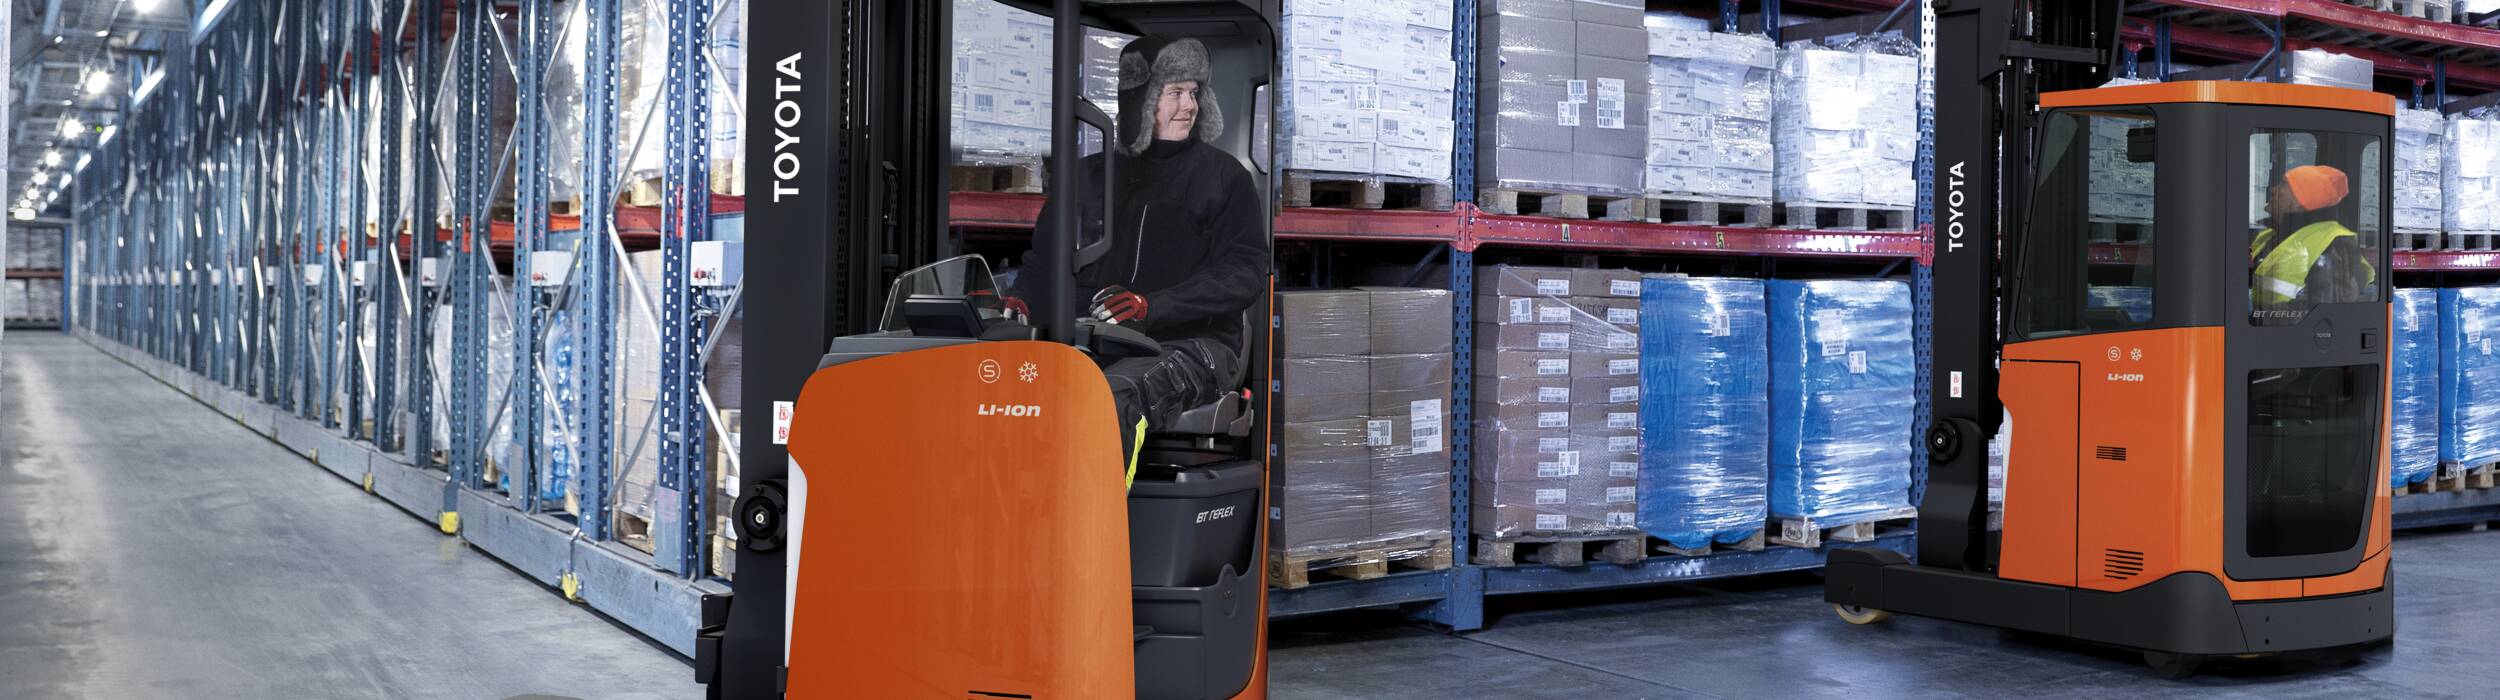 toyota reach trucks in cold store environment